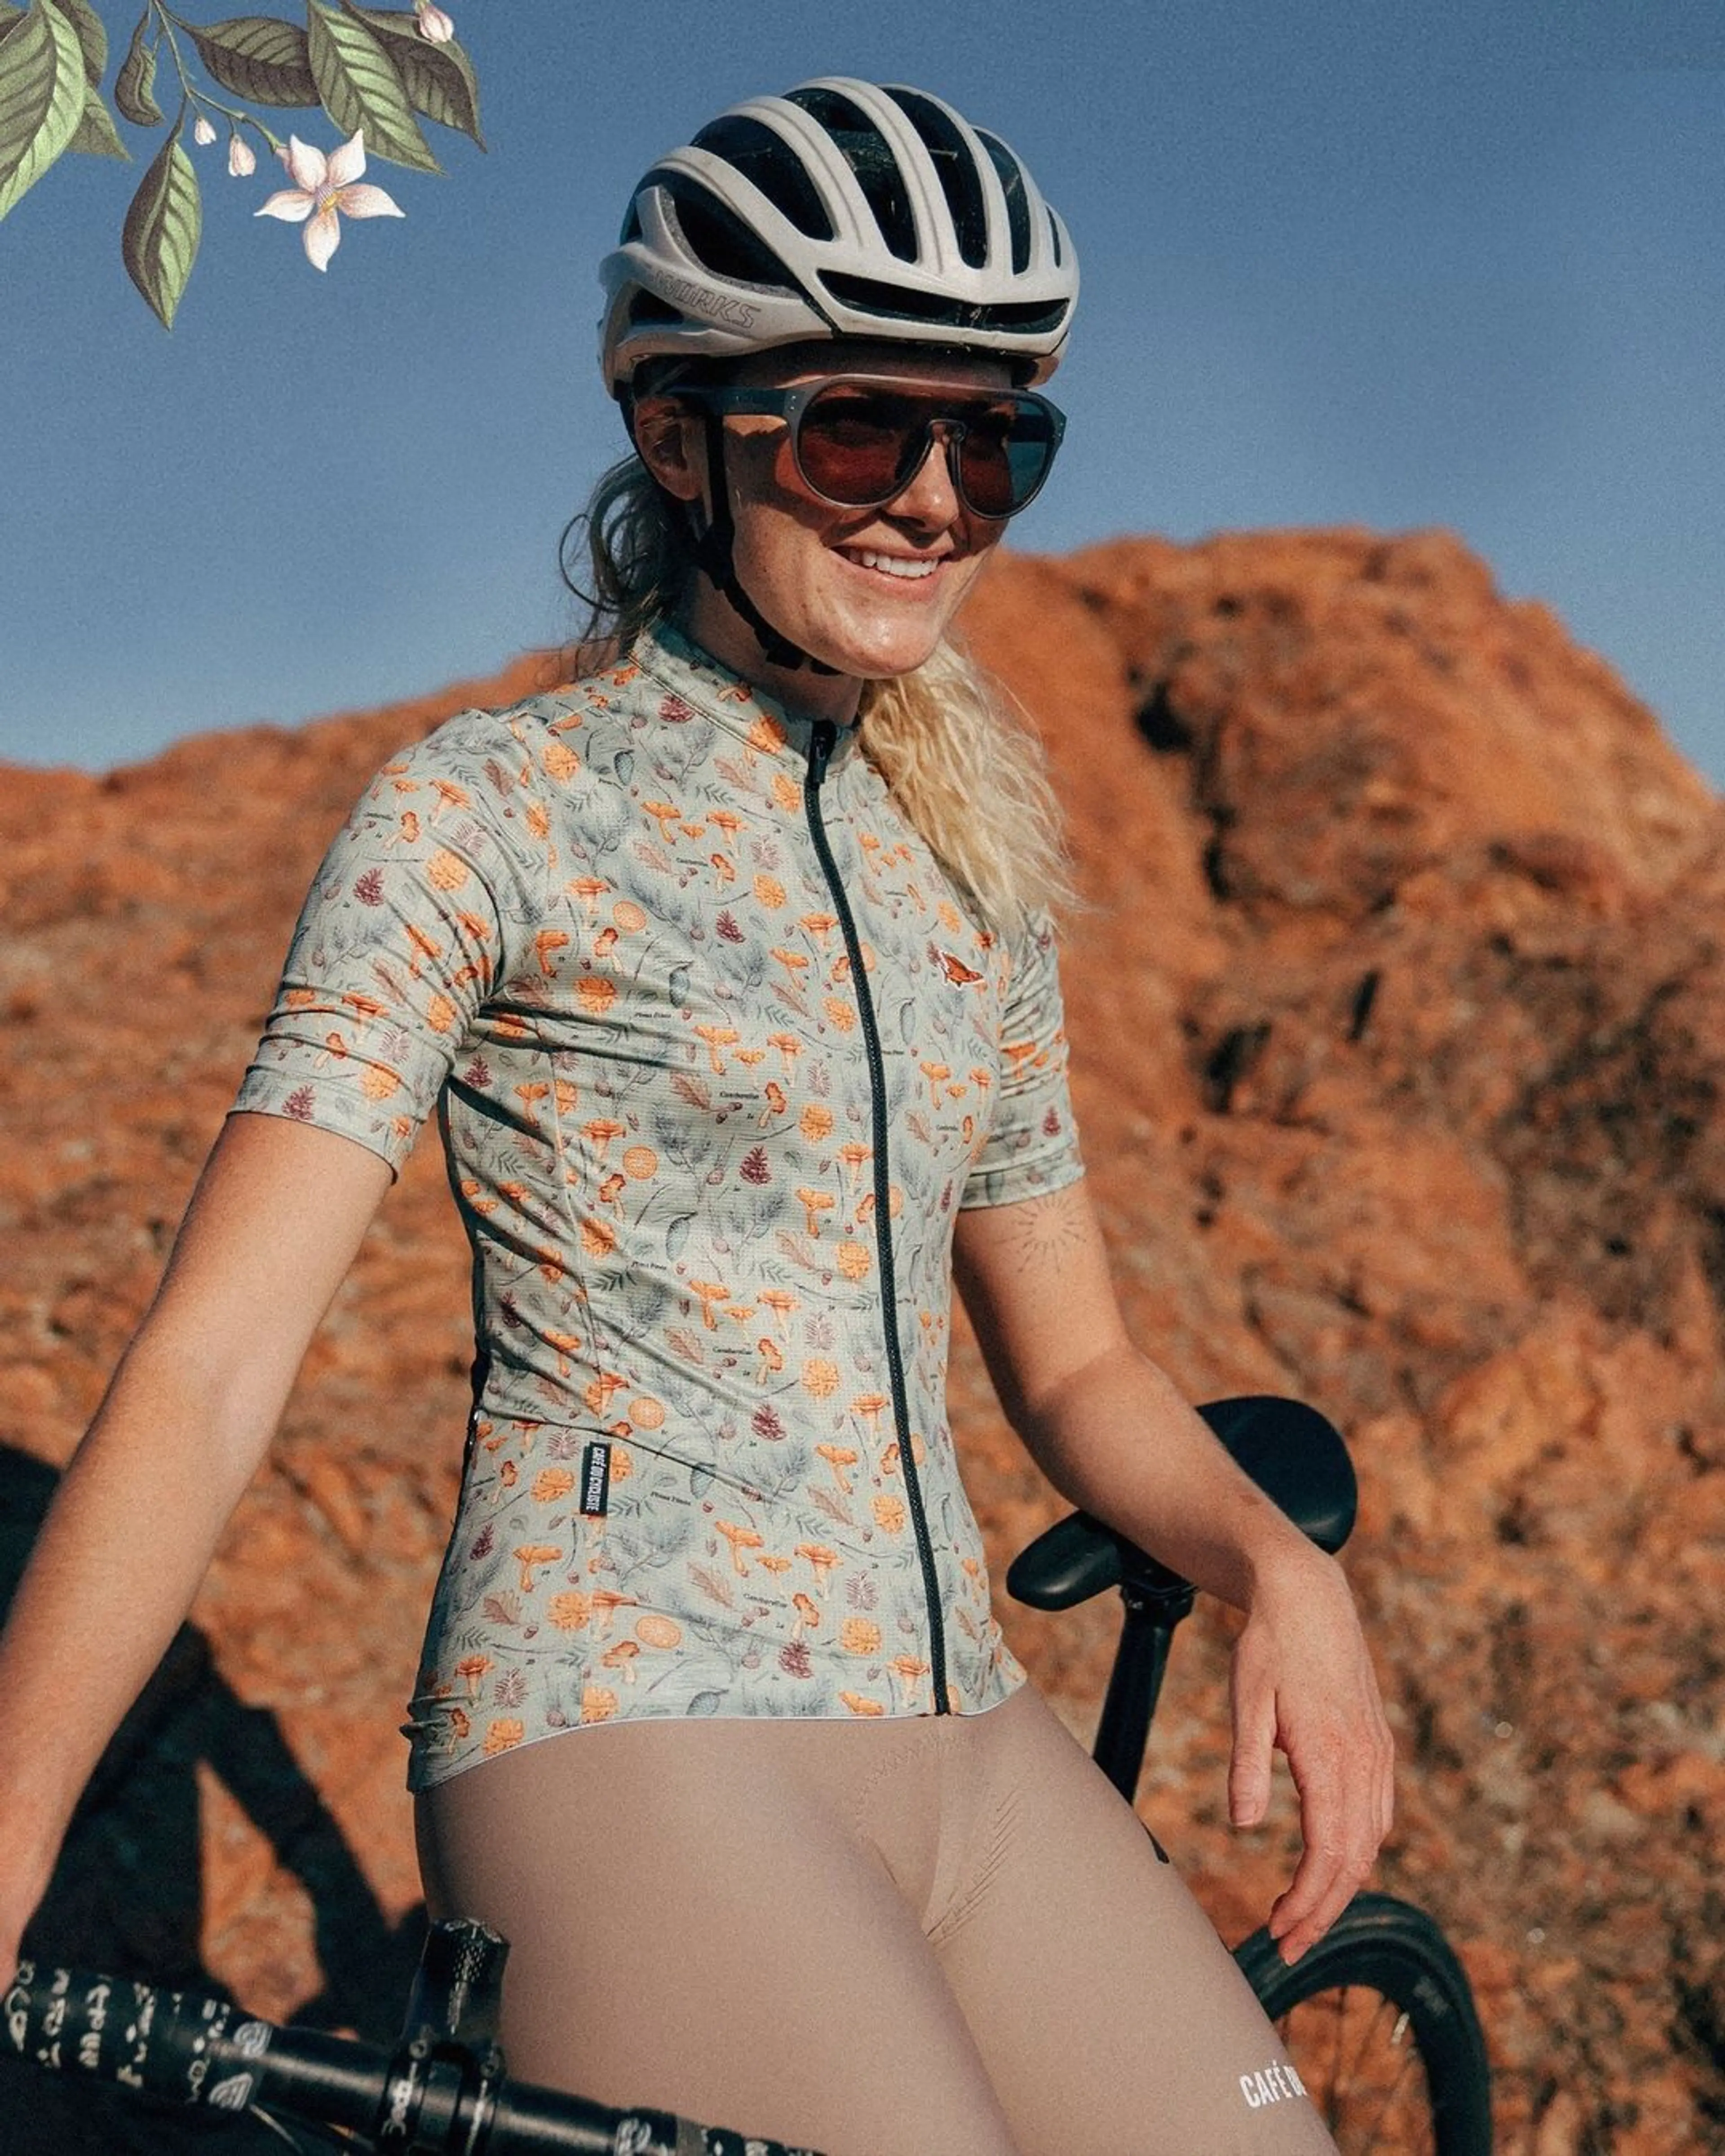 Introduction to Top Cycling Clothing Brands